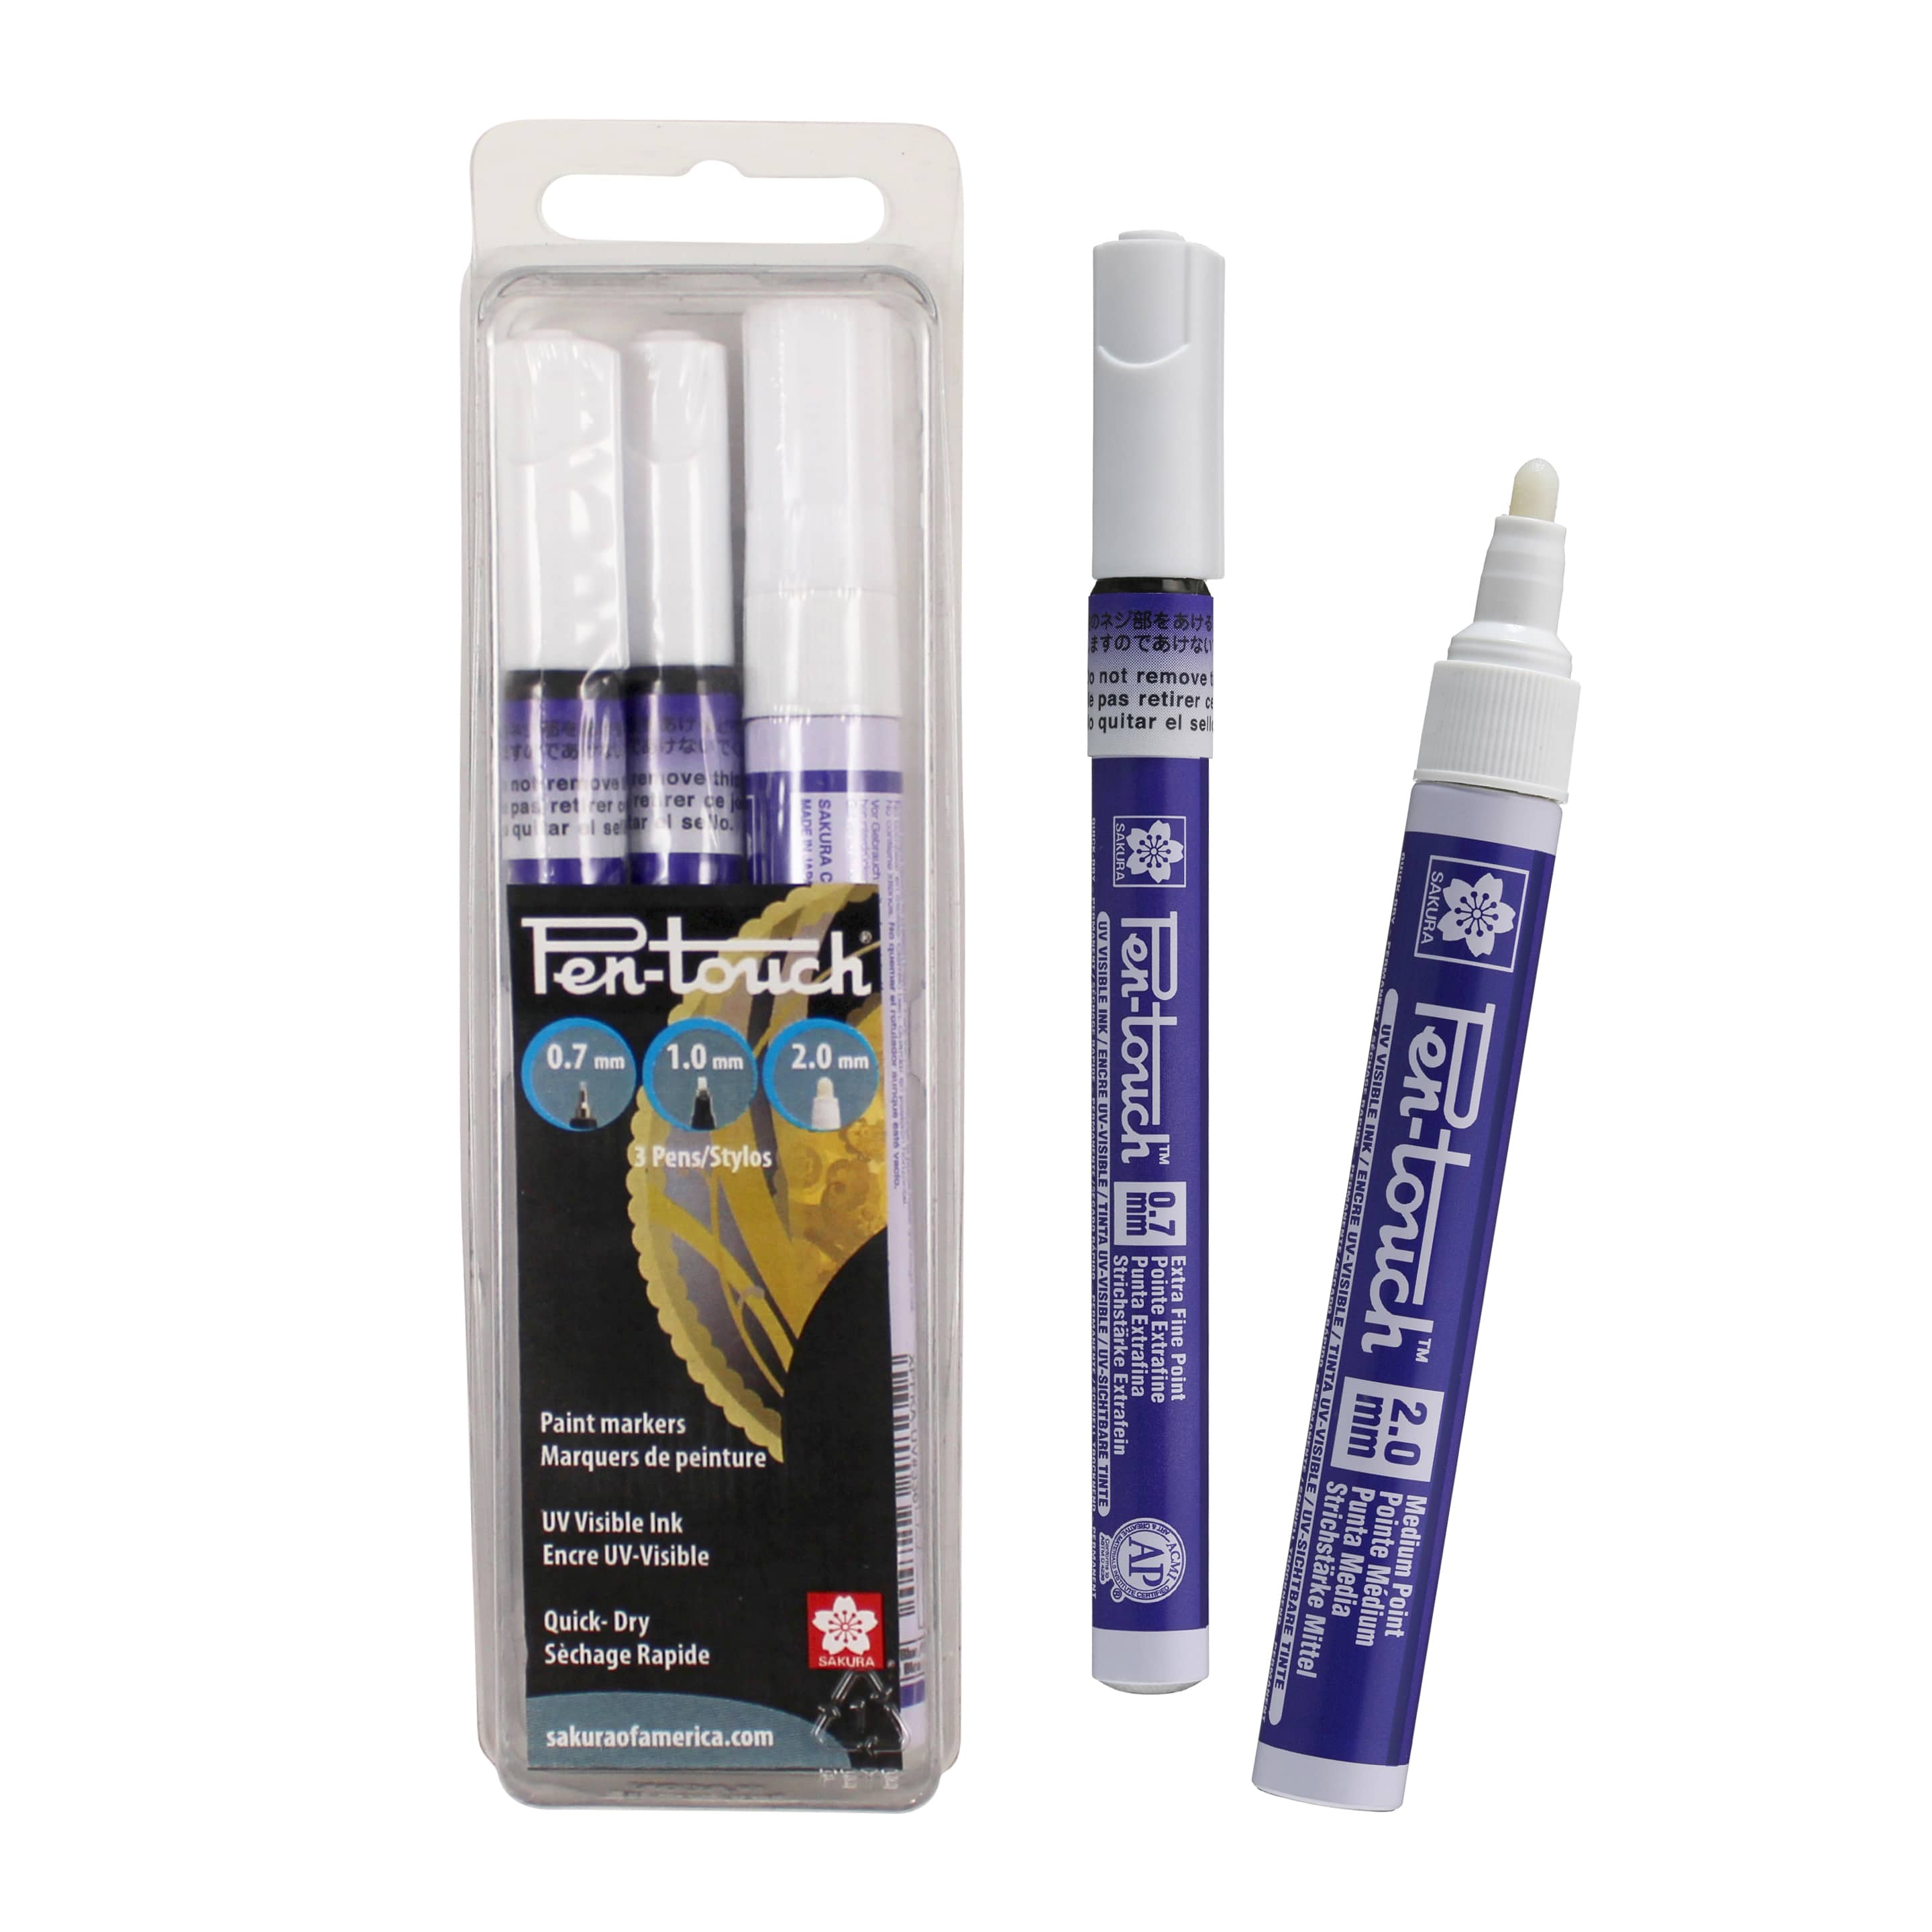 6 Packs: 3 ct. (18 total) Pen Touch® UV Visible Ink Marker Set